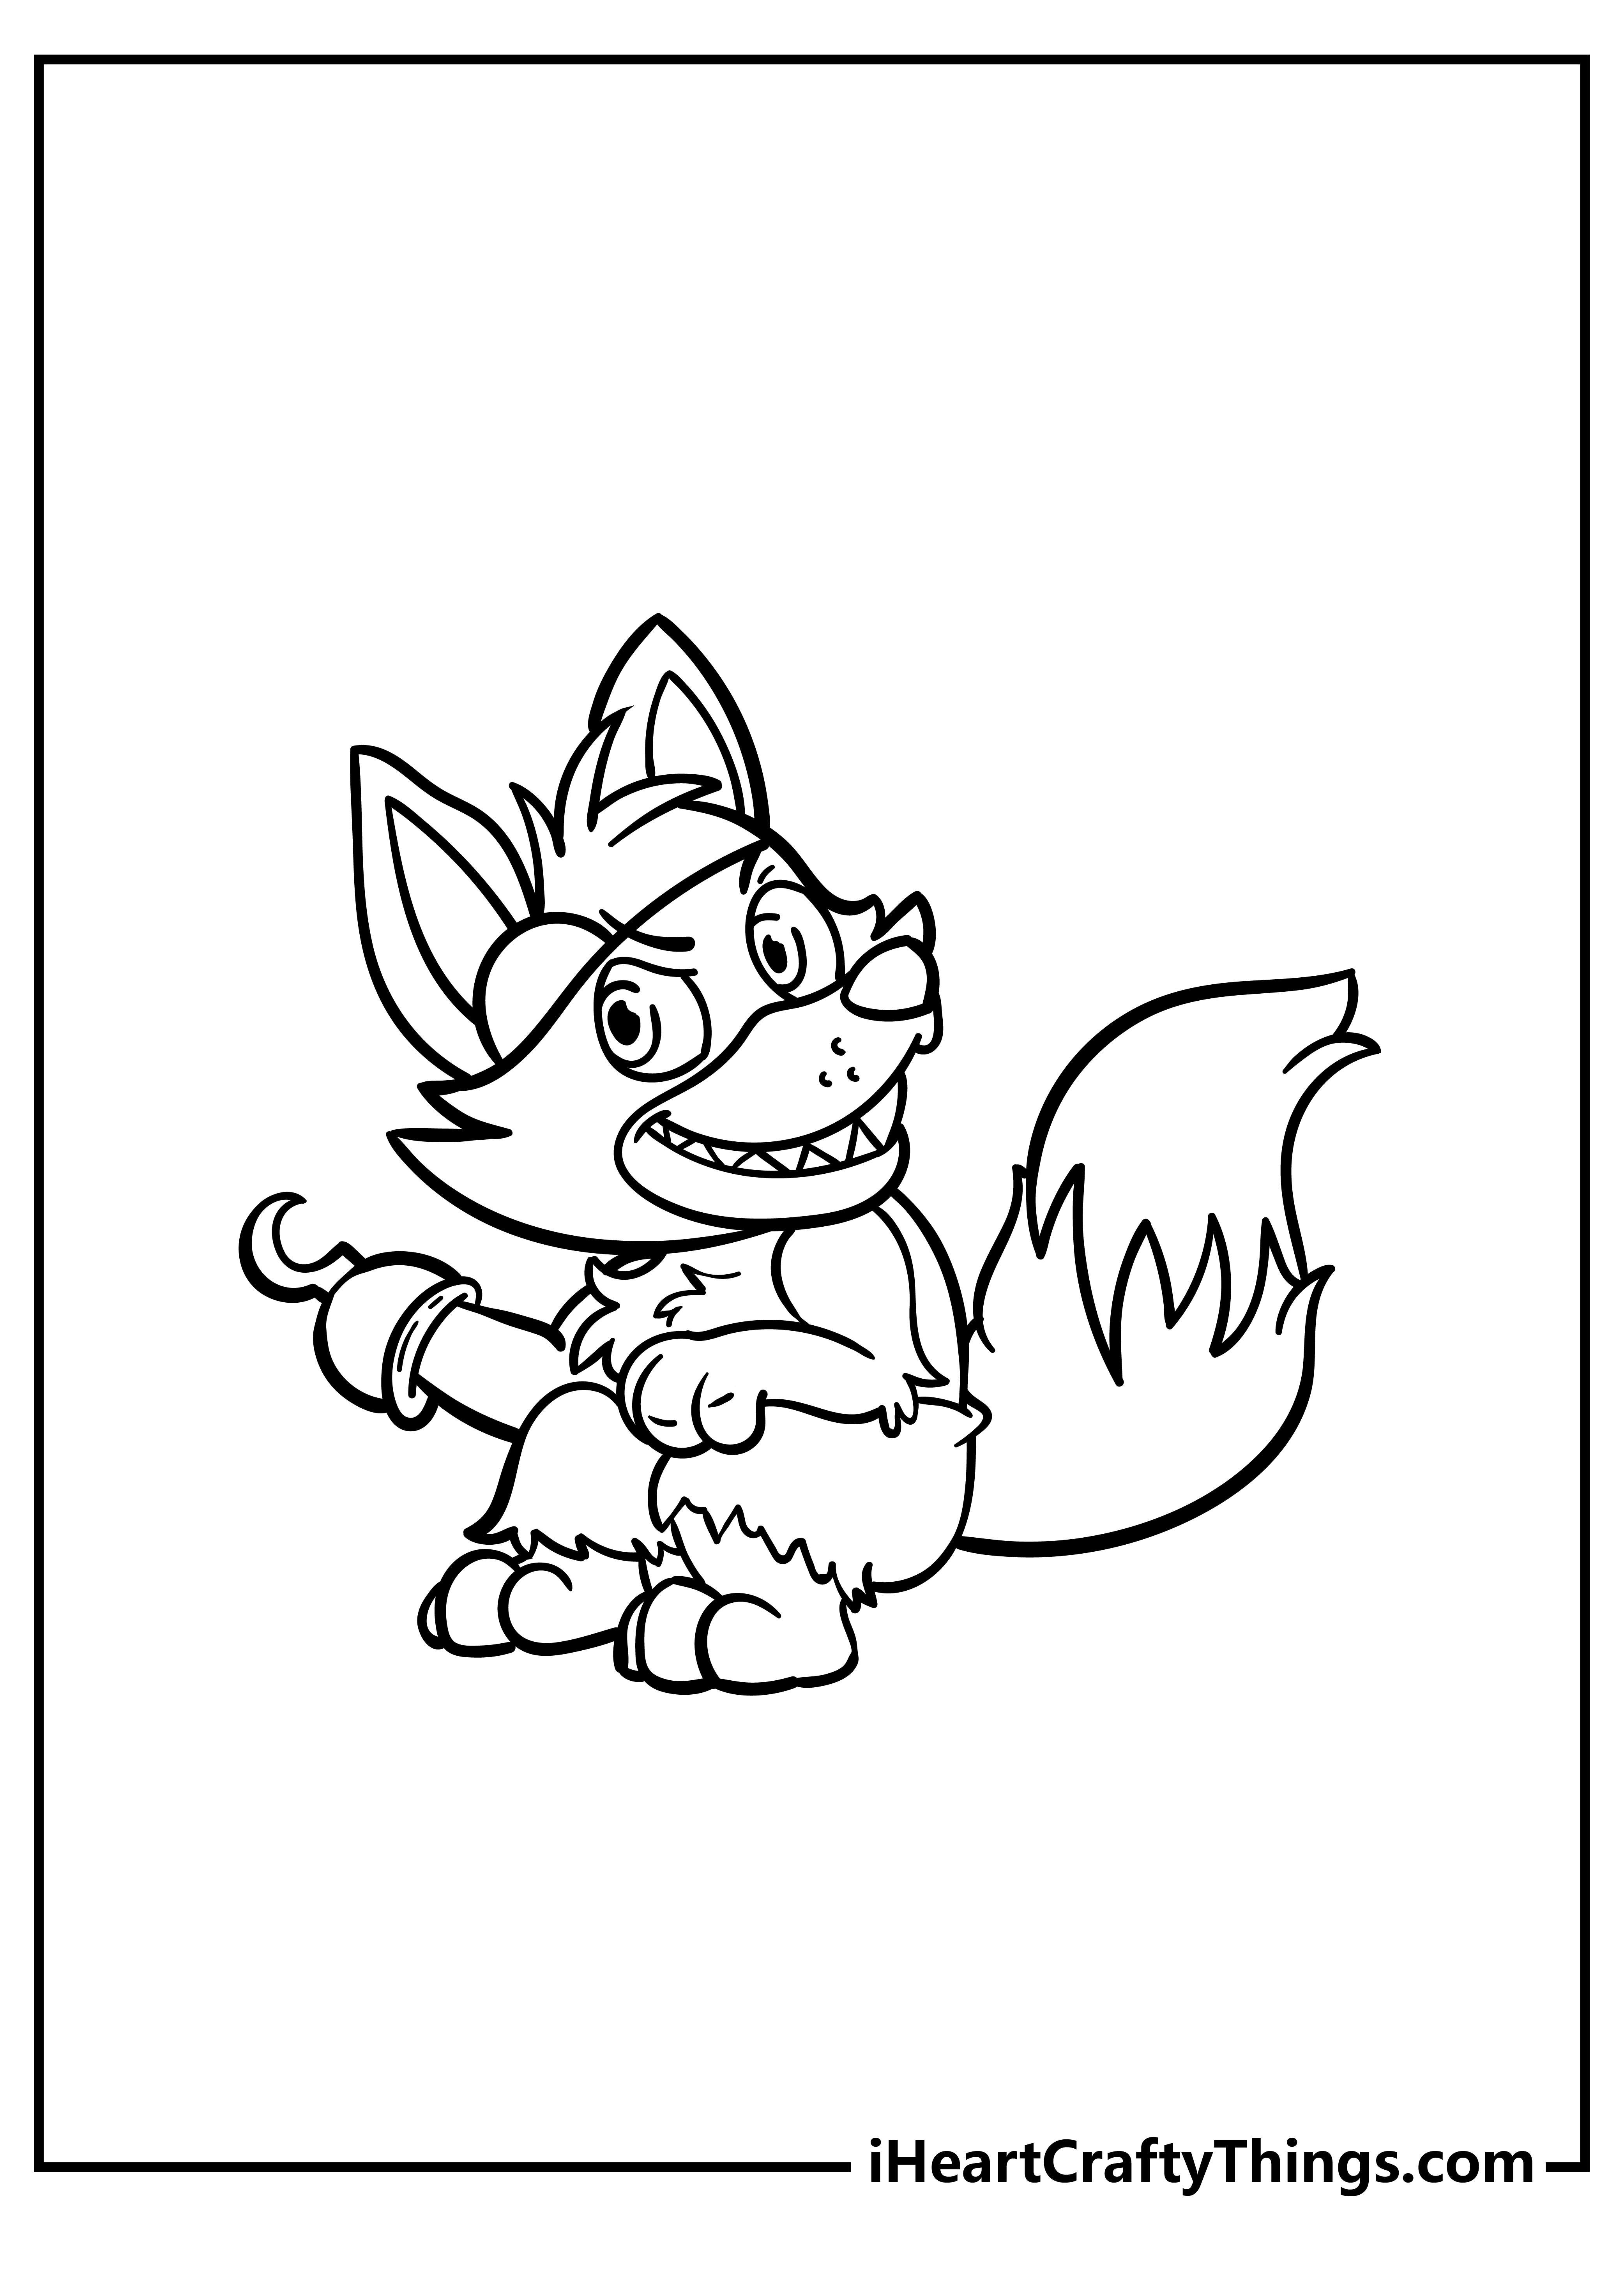 Five Nights At Freddy’s Coloring Pages for kids free download